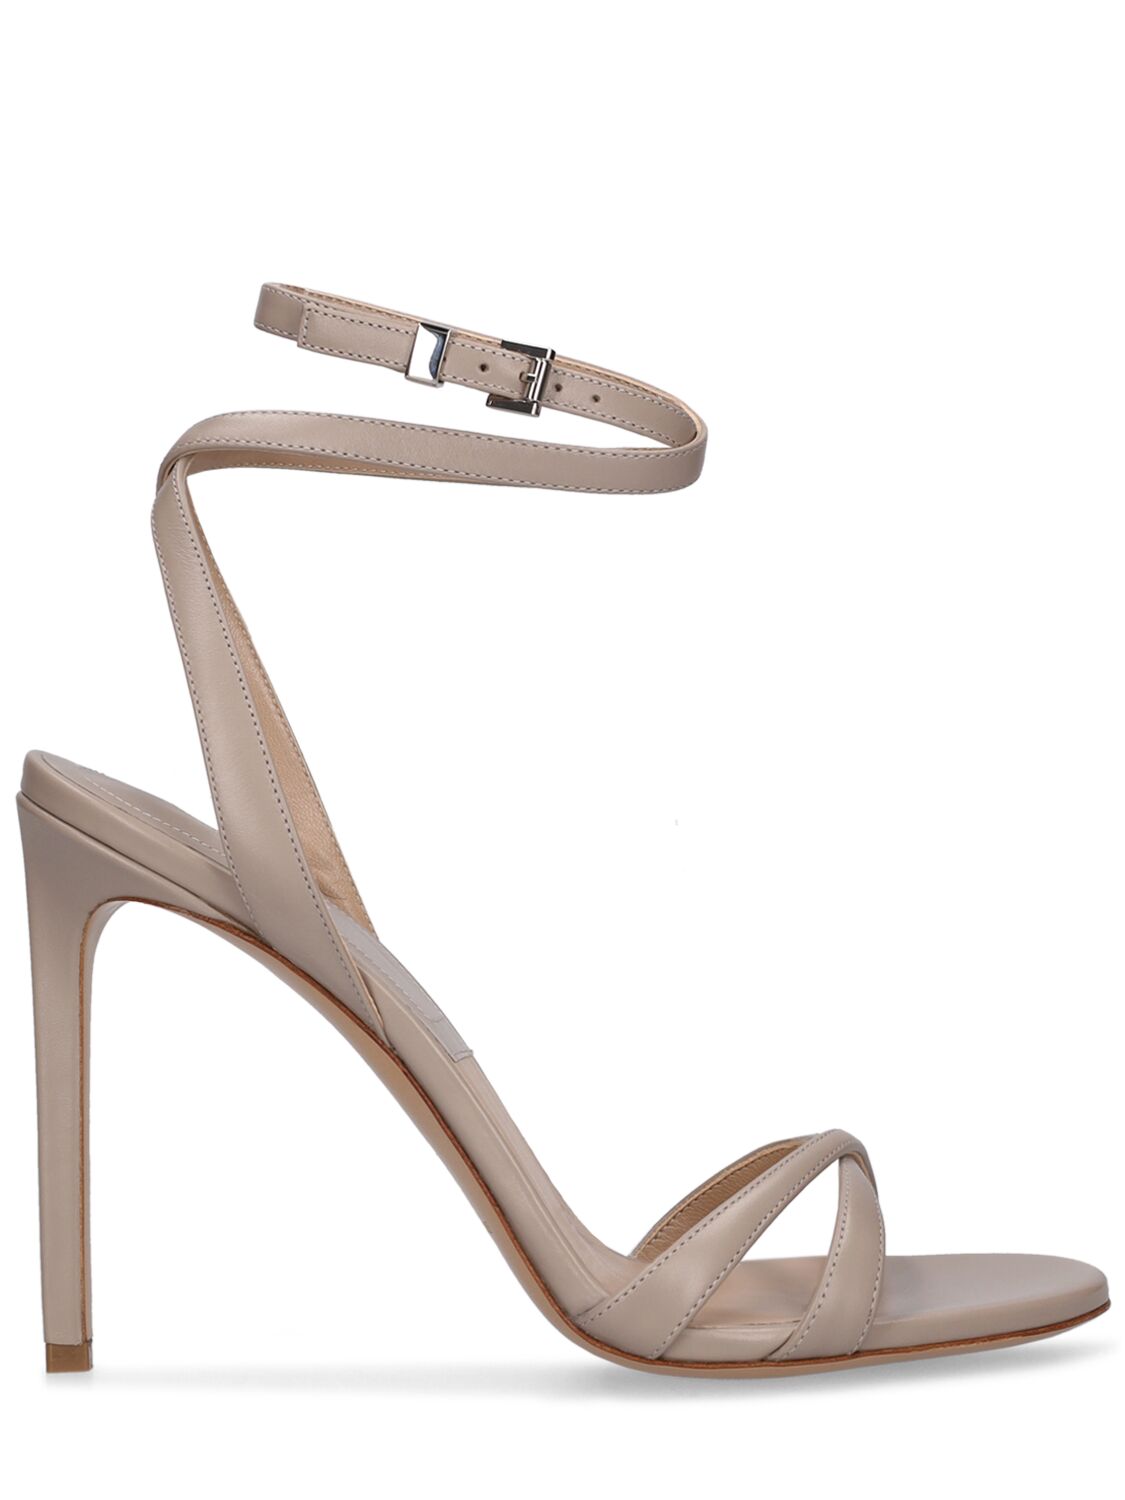 Michael Kors 105mm Chrissy Glossy Leather Sandals In Taupe